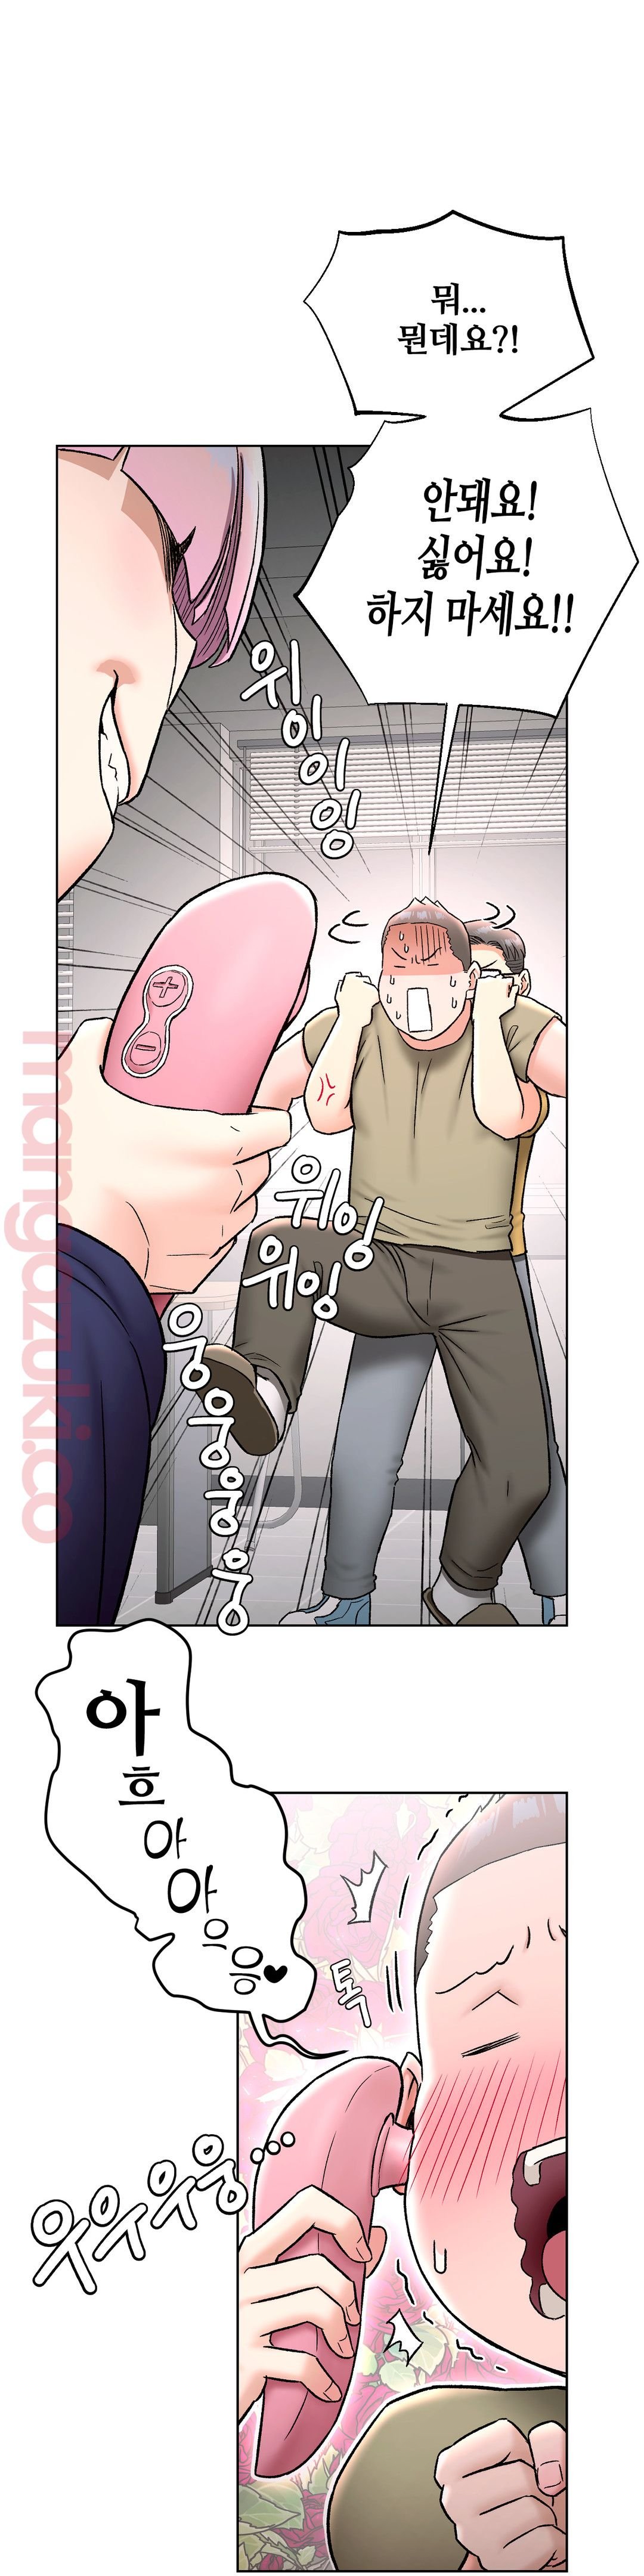 Sexercise Raw - Chapter 66 Page 5